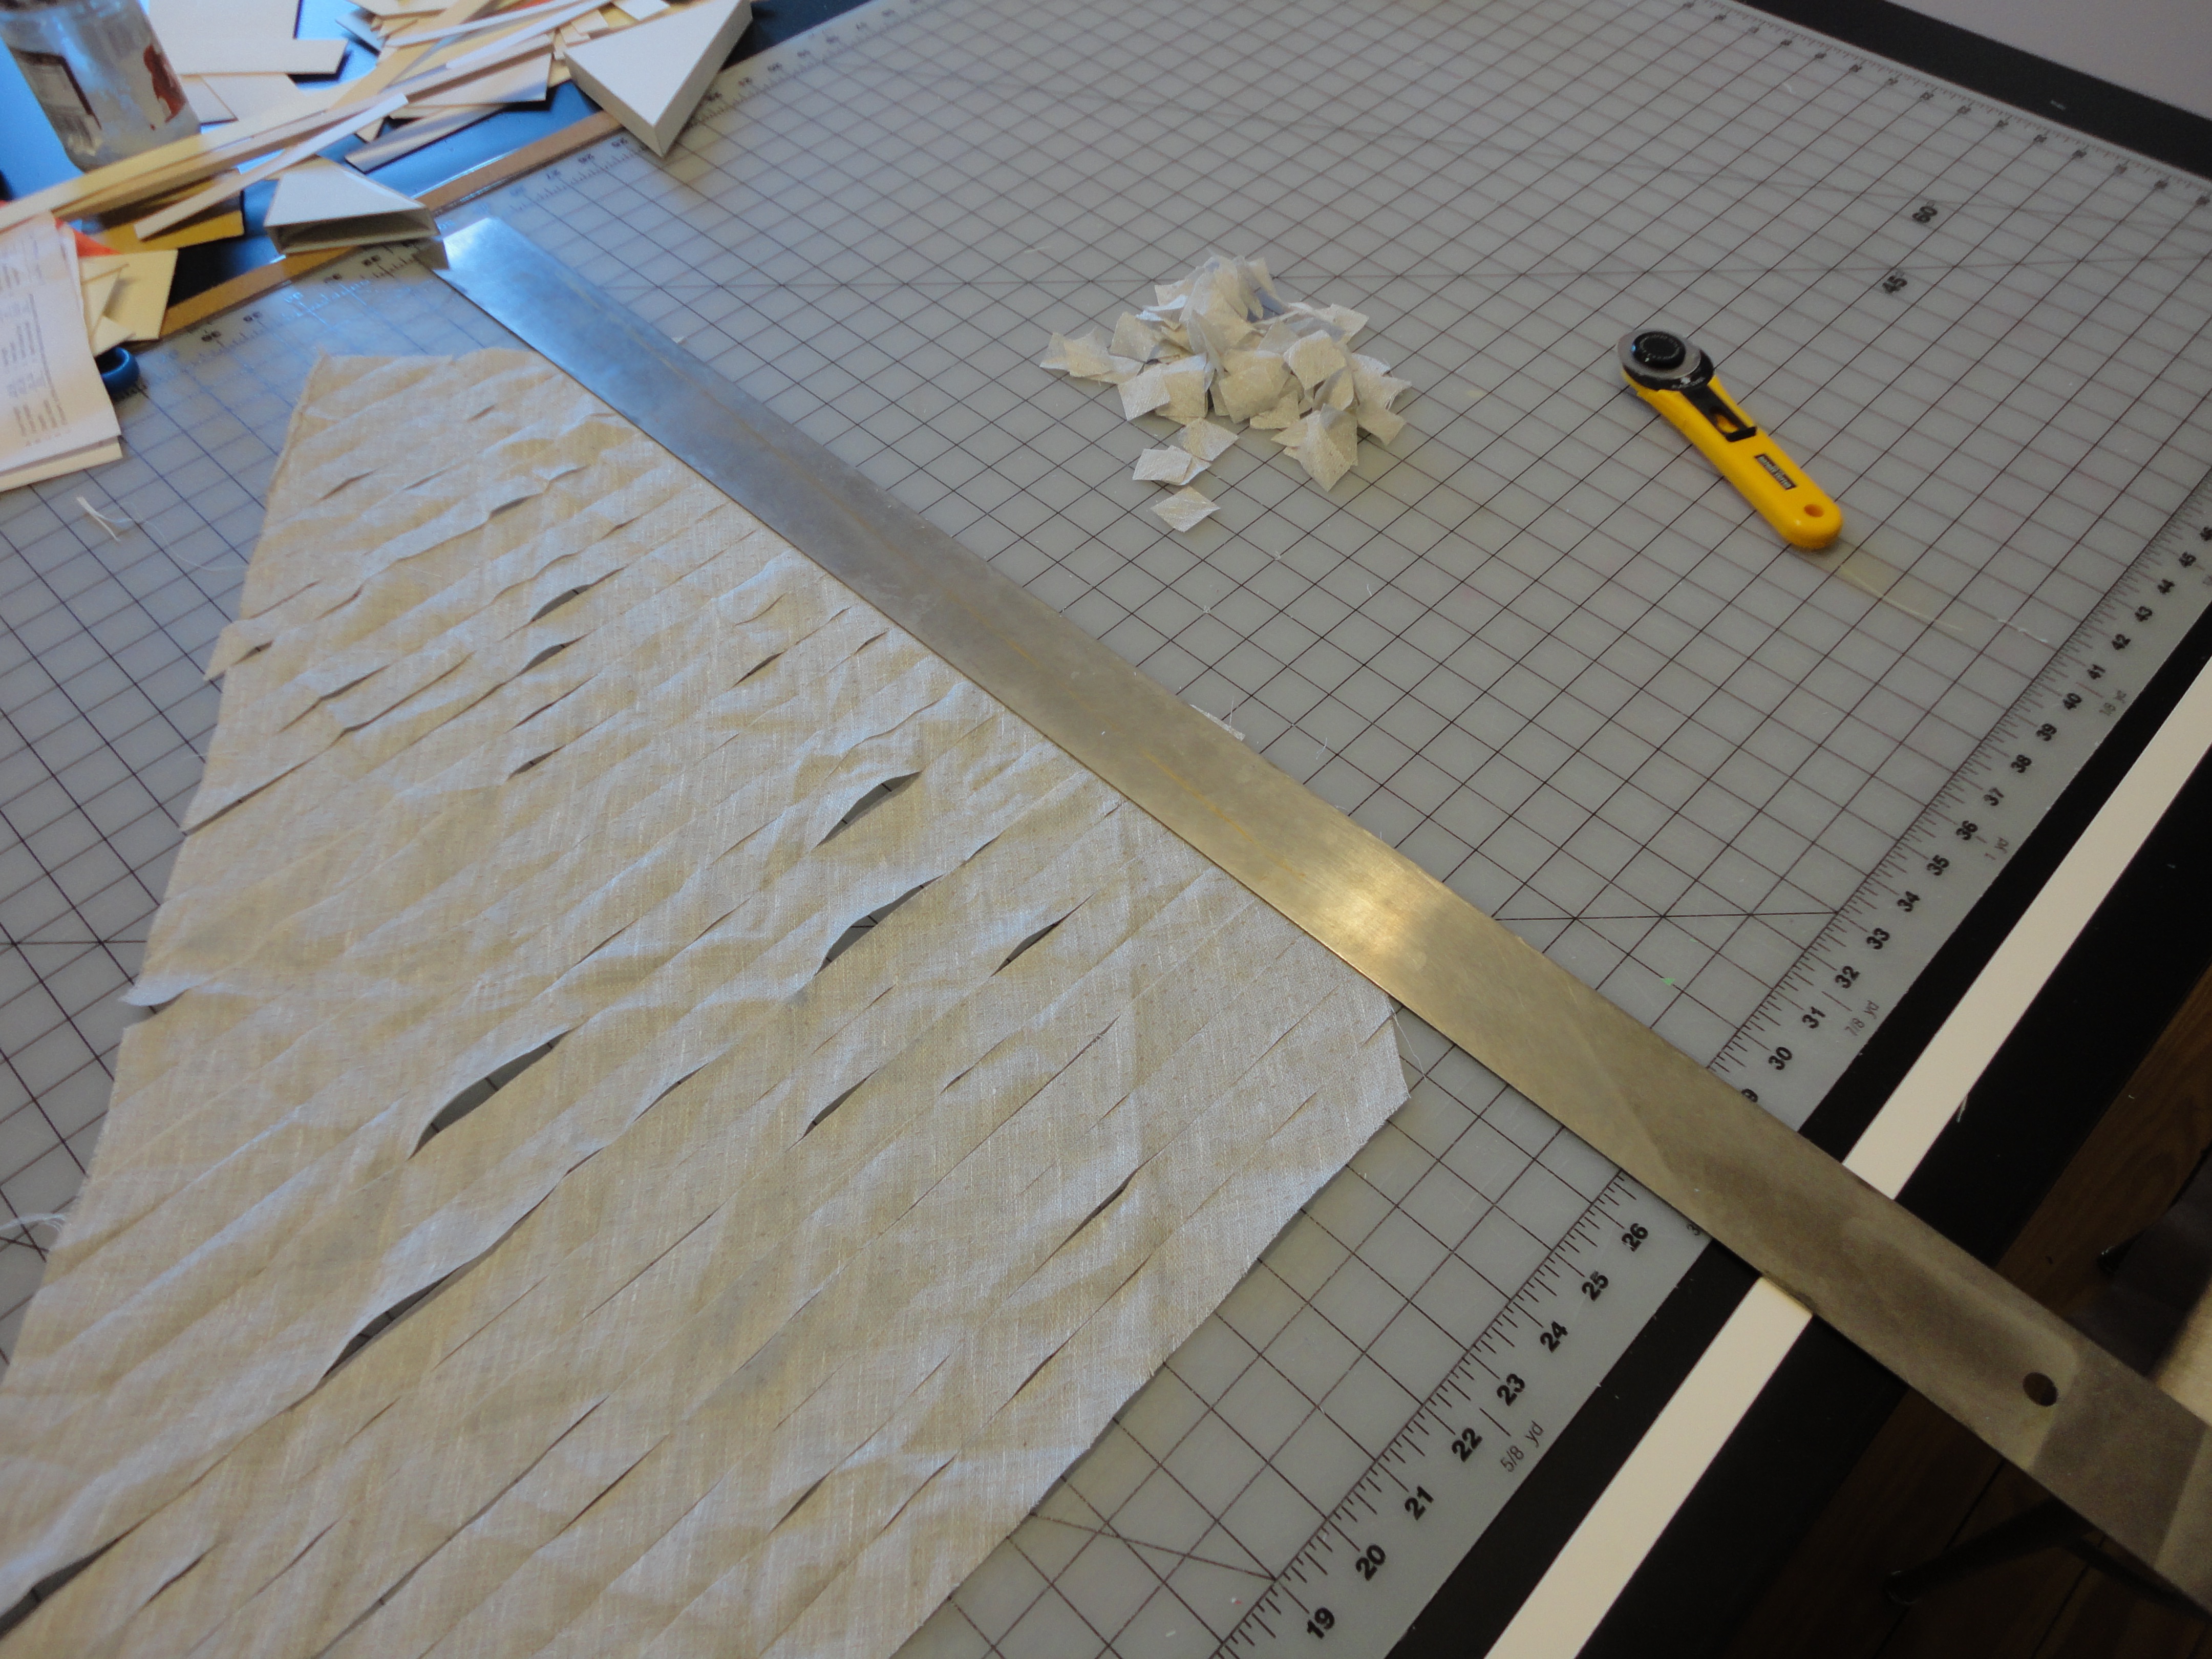 Cutting the linen fabric into tiny pieces so it can be beaten.